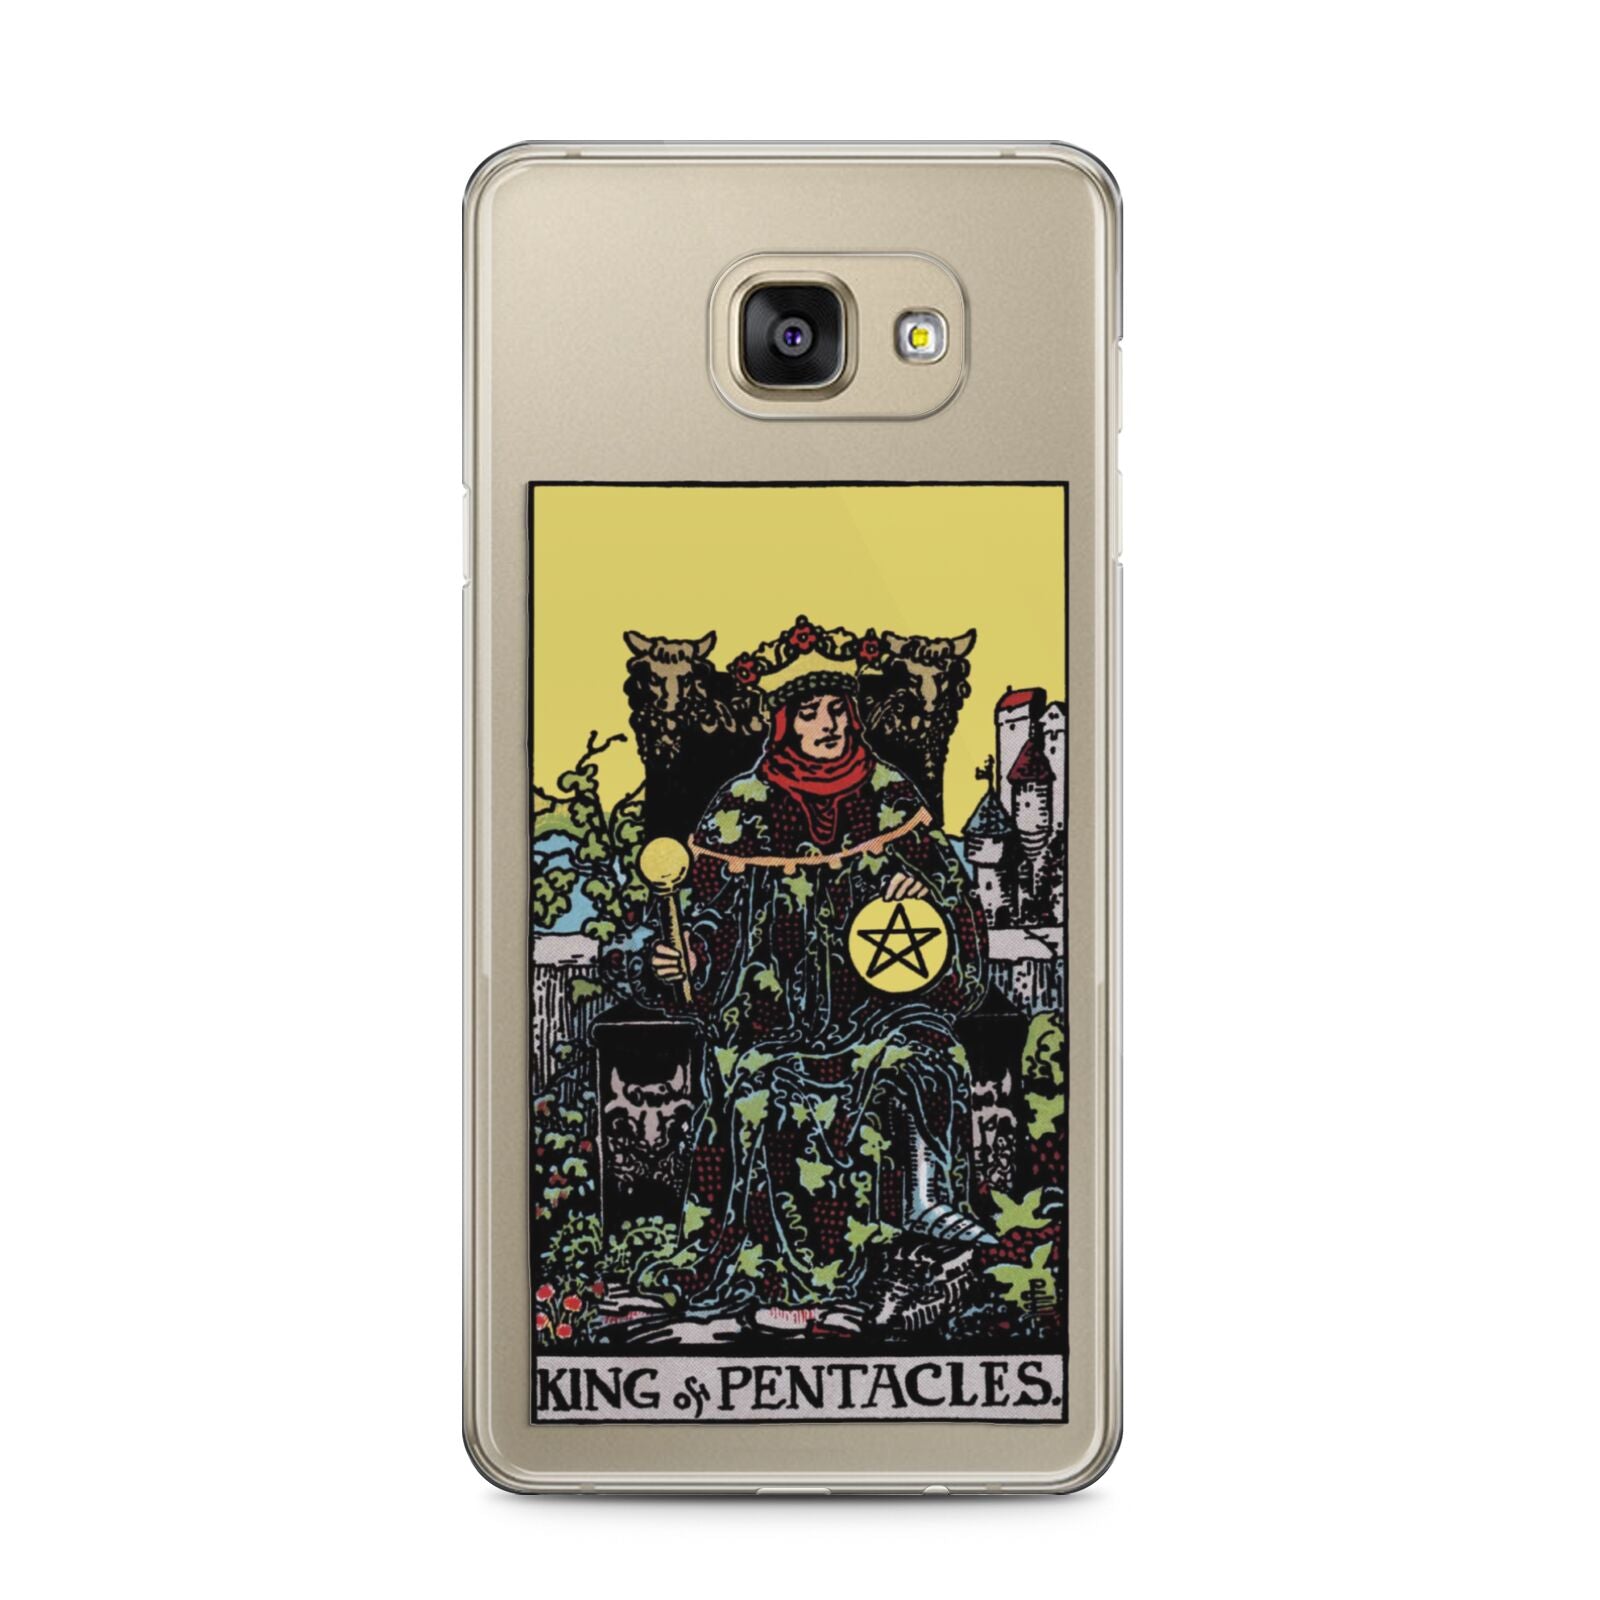 King of Pentacles Tarot Card Samsung Galaxy A5 2016 Case on gold phone